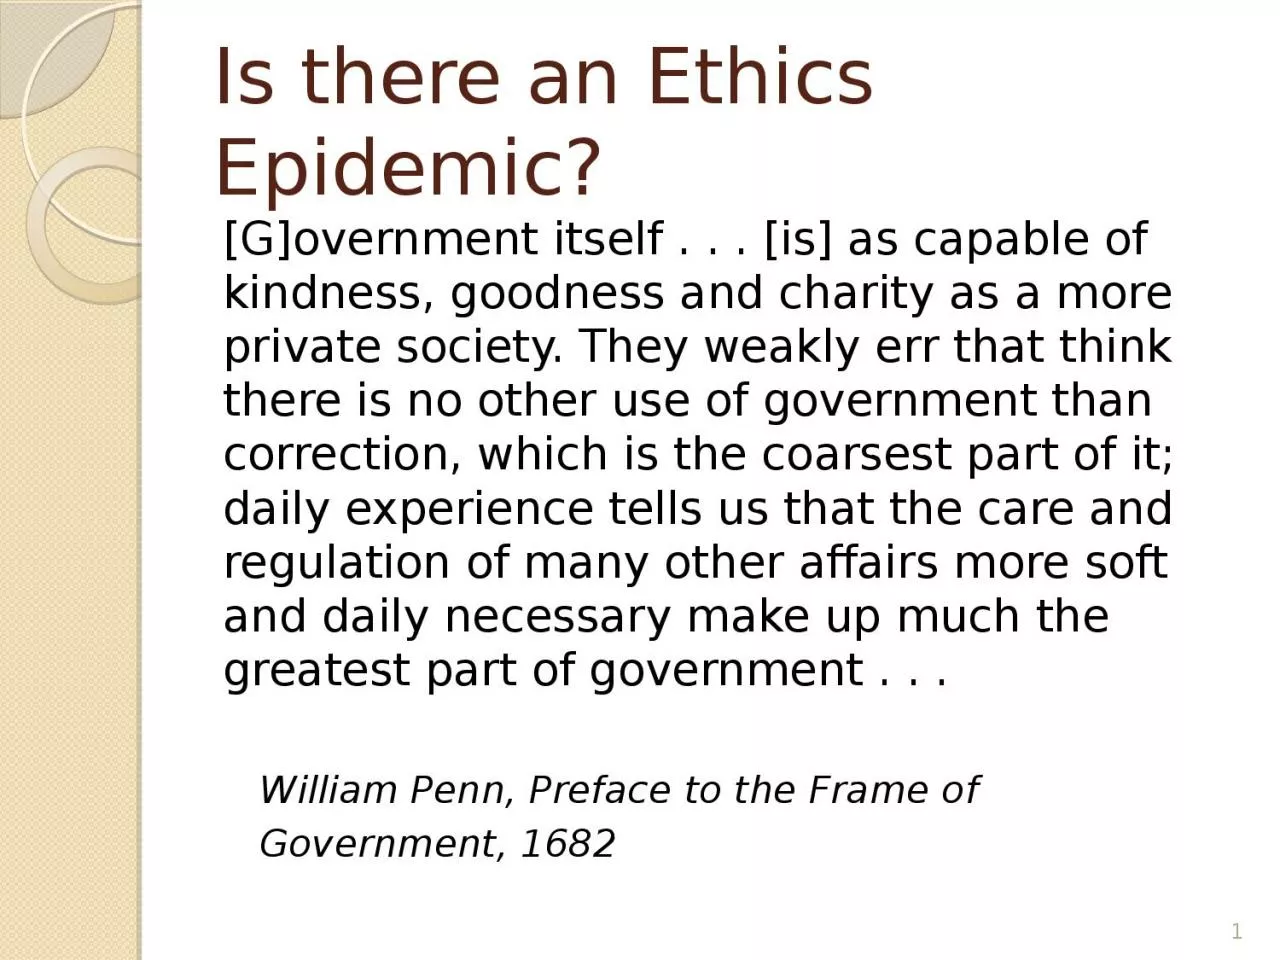 Is there an Ethics Epidemic?